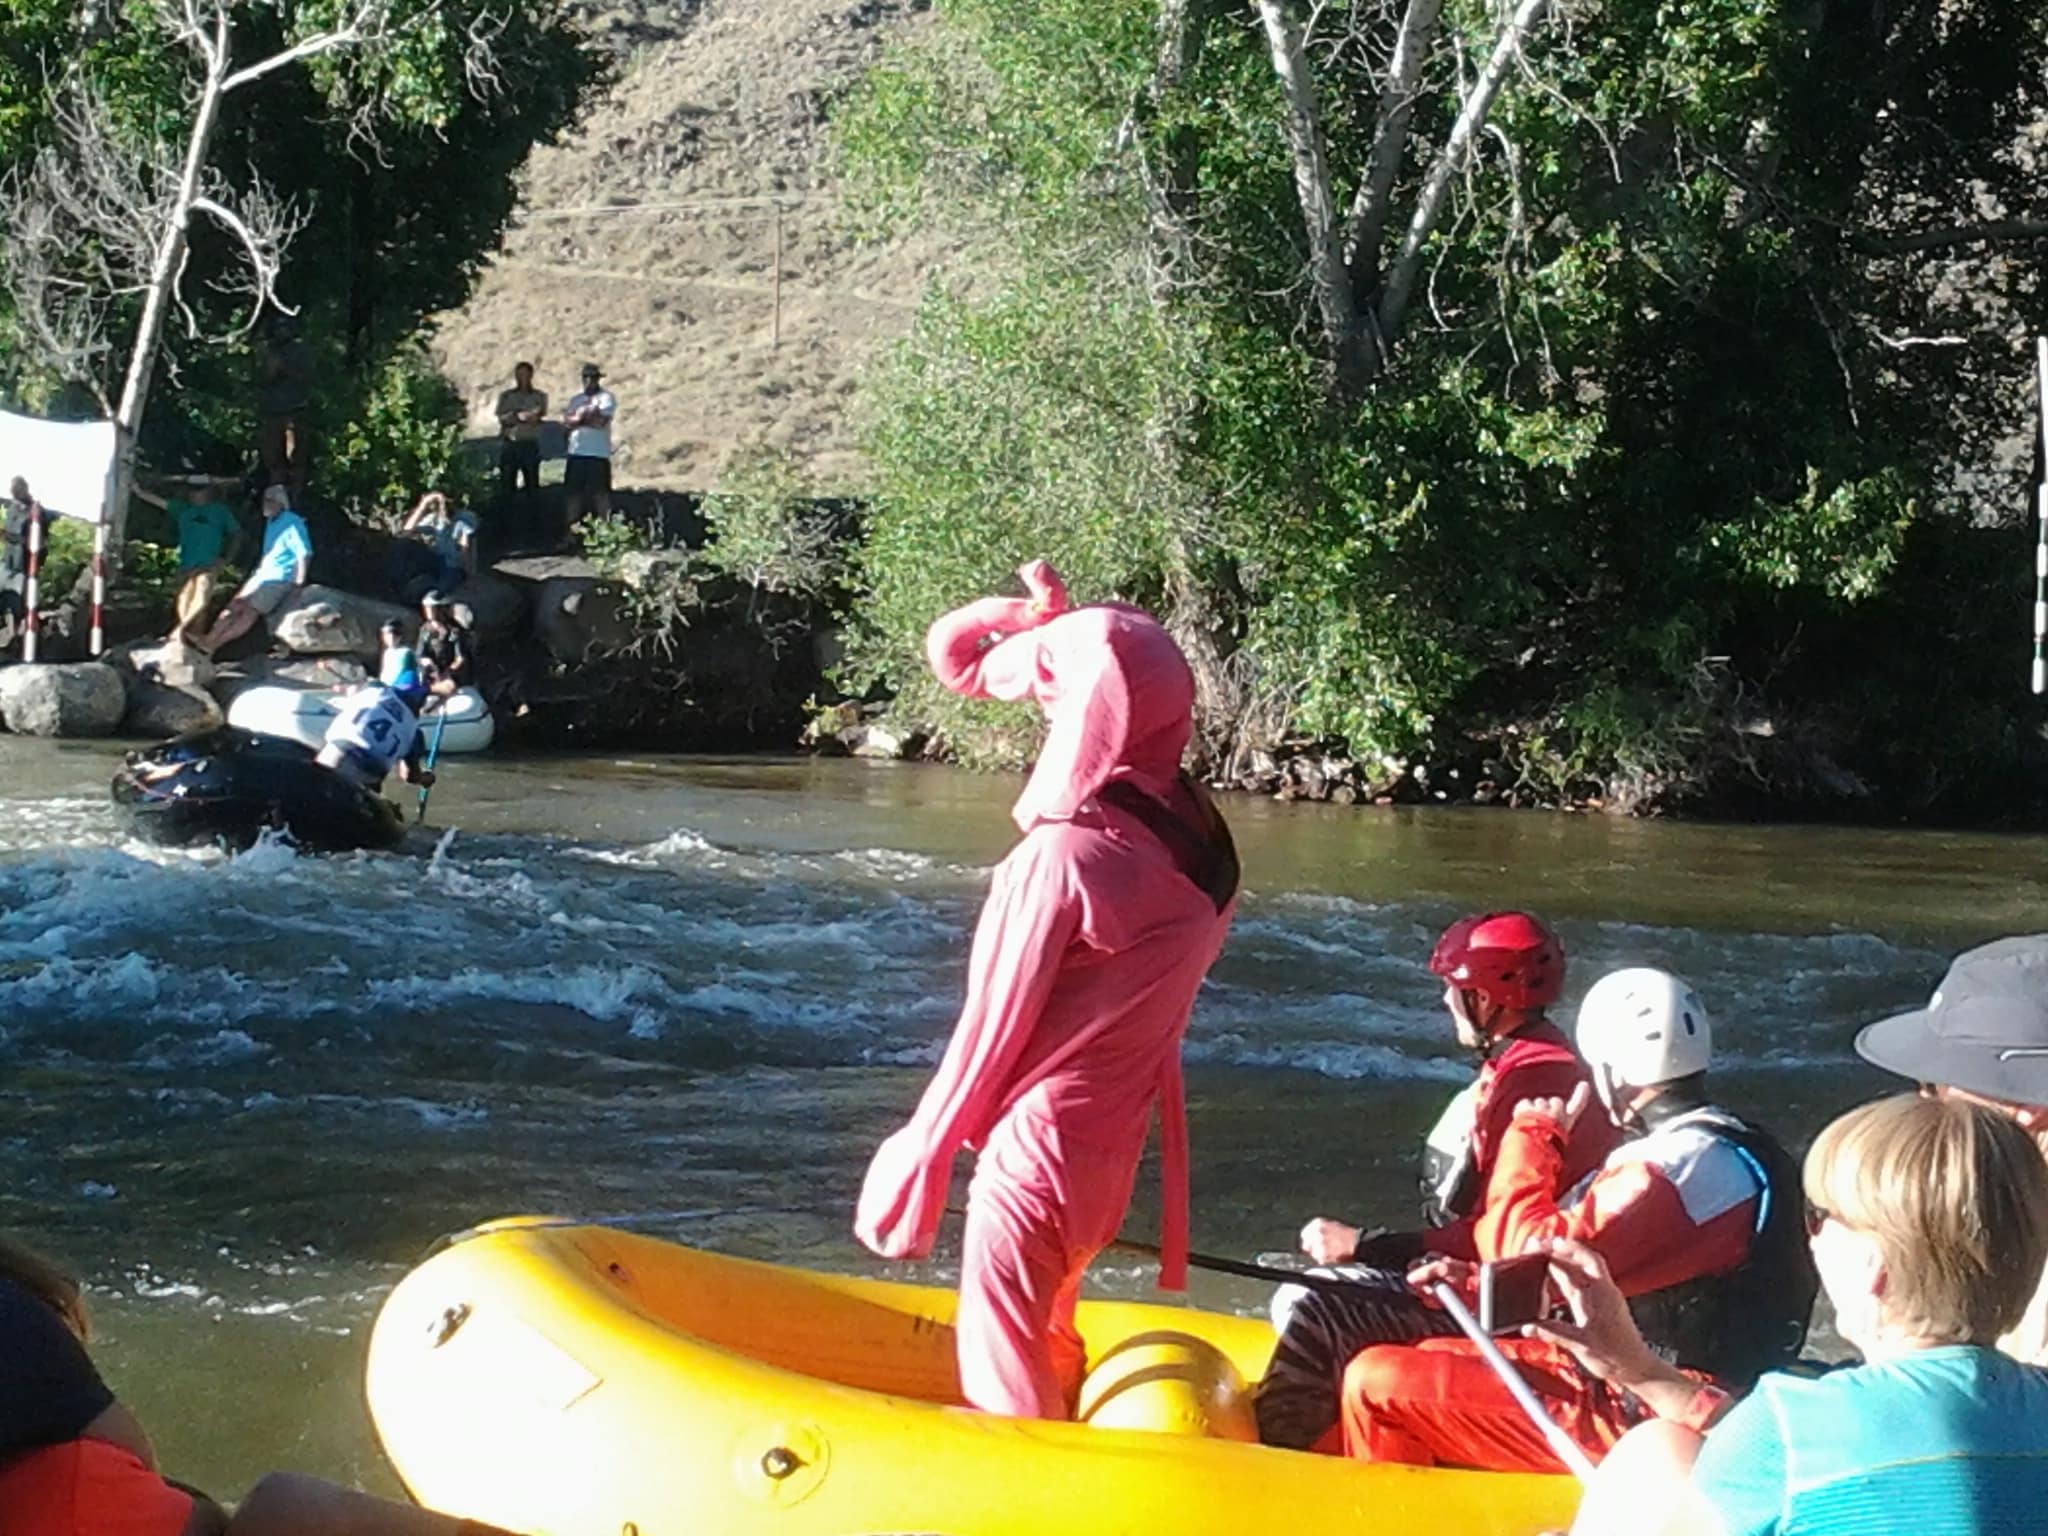 River competition with a person dressed in a pink elephant standing in the raft watching the other rafts, spectator all around.